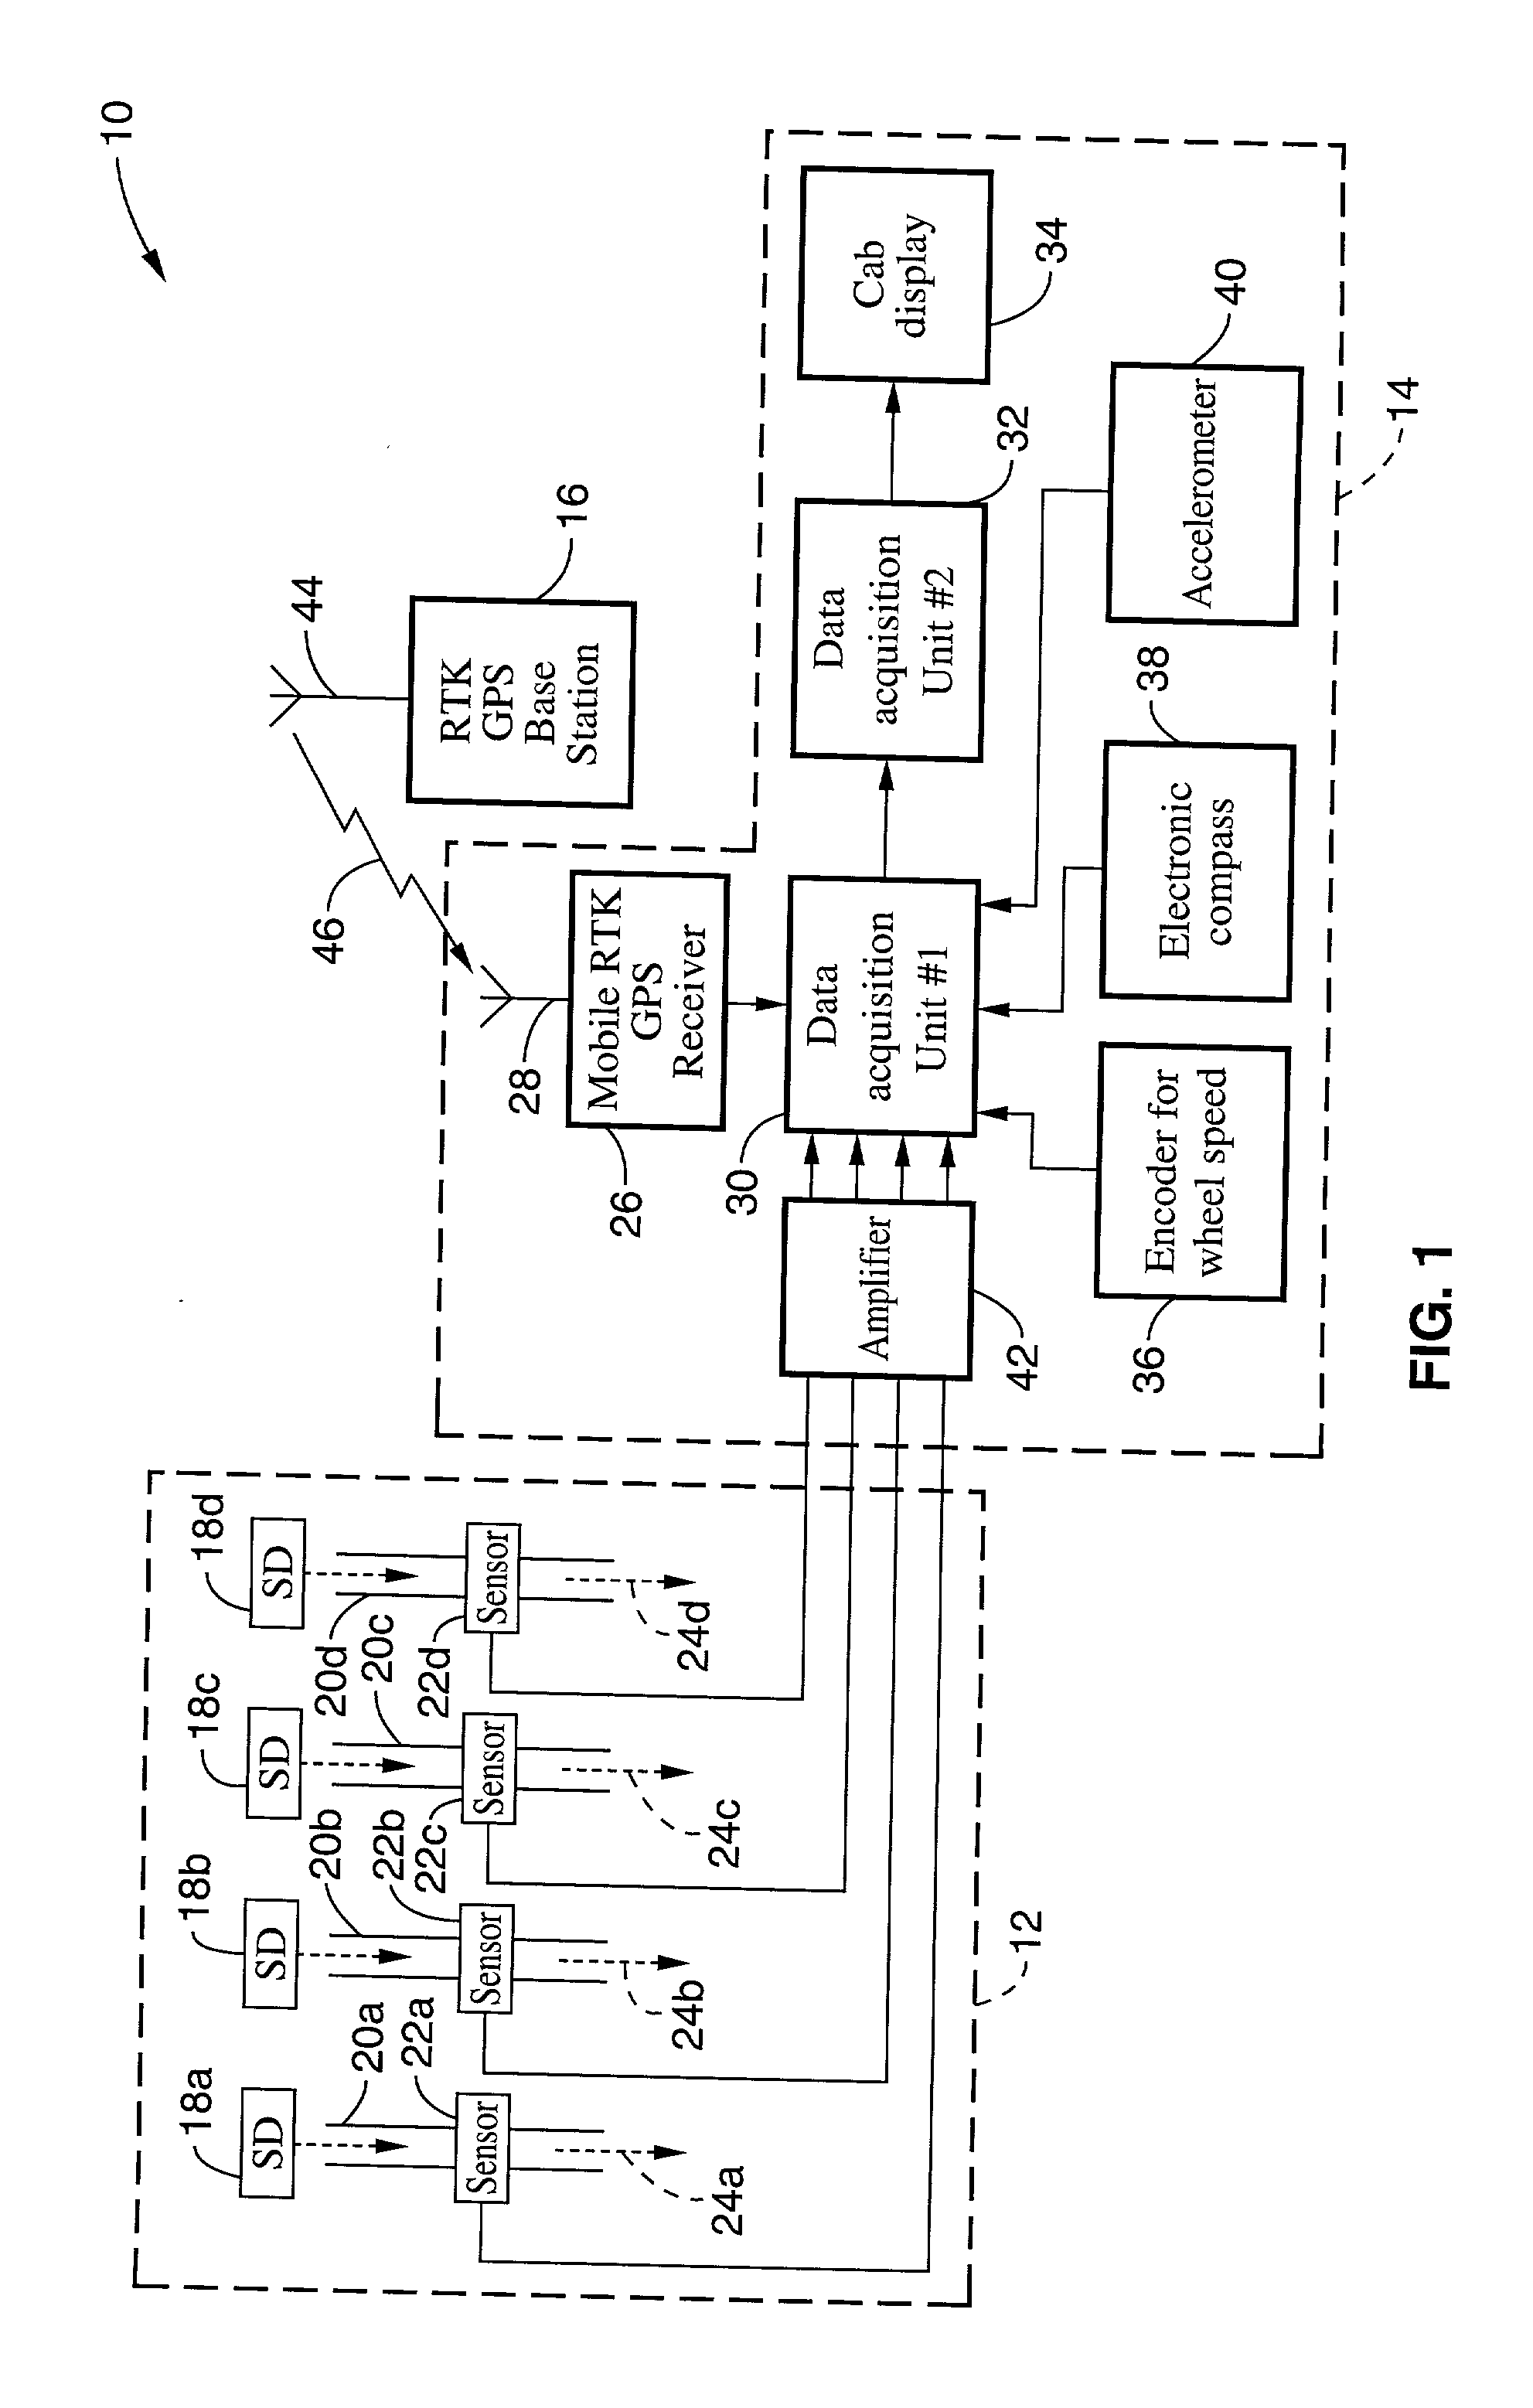 Method and apparatus for ultra precise GPS-based mapping of seeds or vegetation during planting